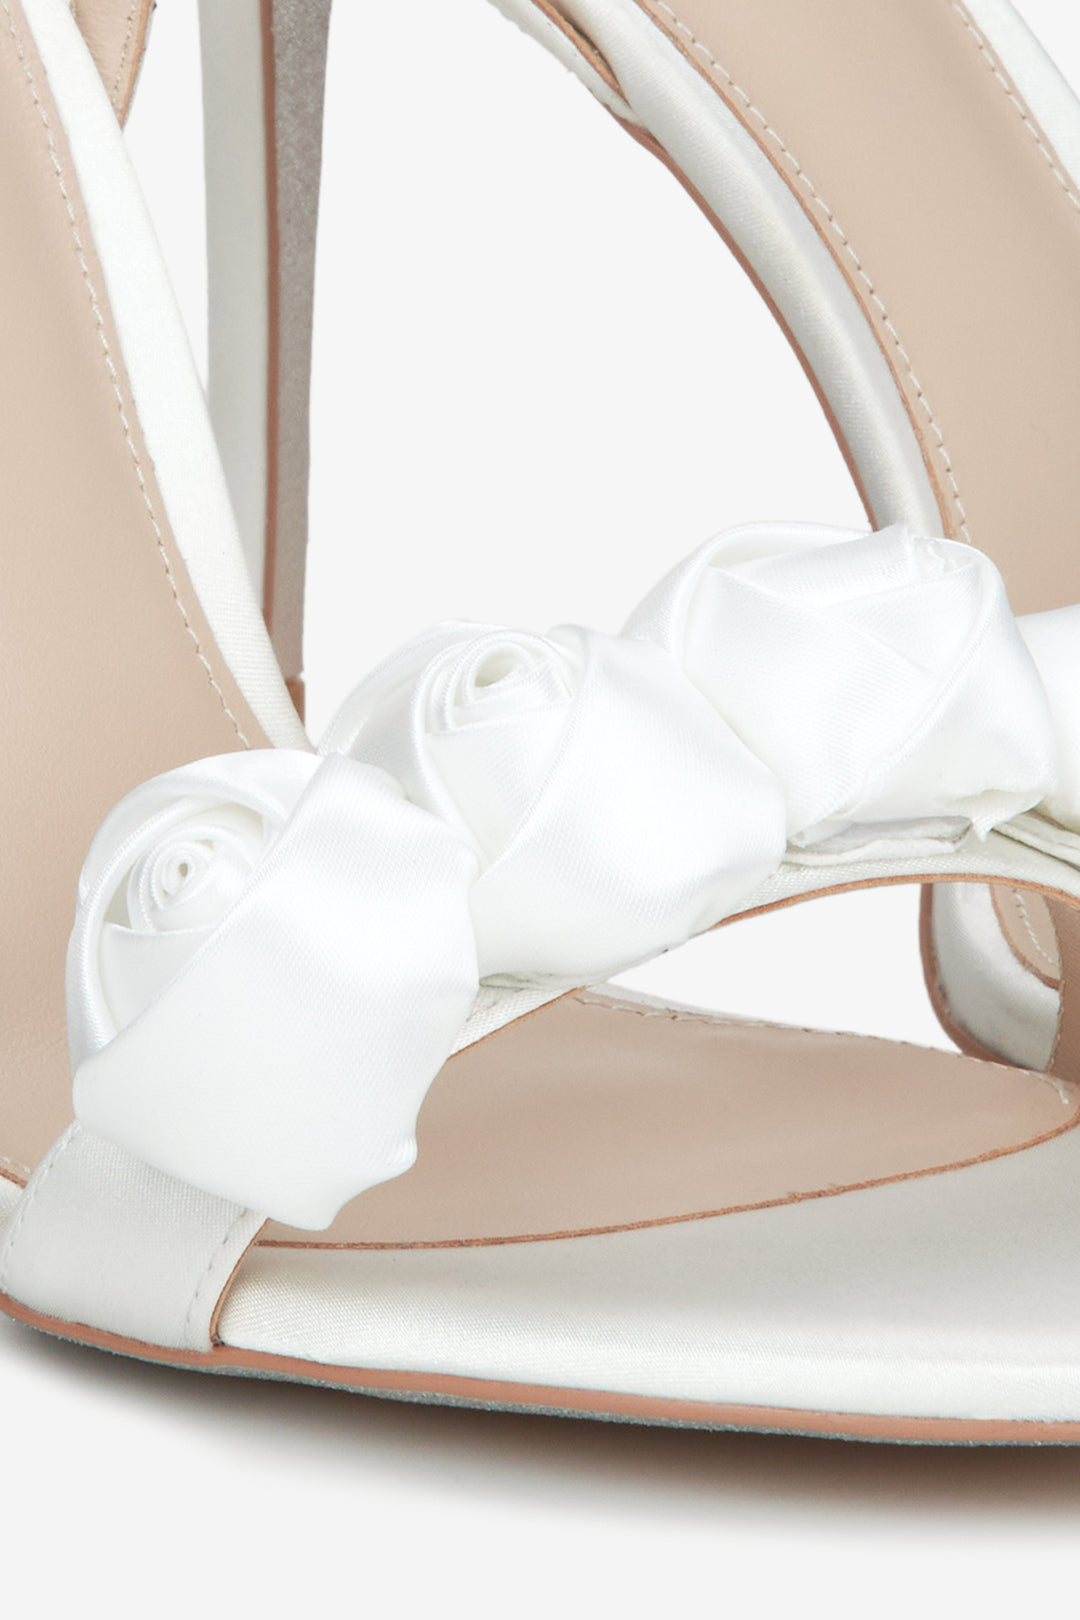 Women's white high-heeled sandals - close-up on the ornament.